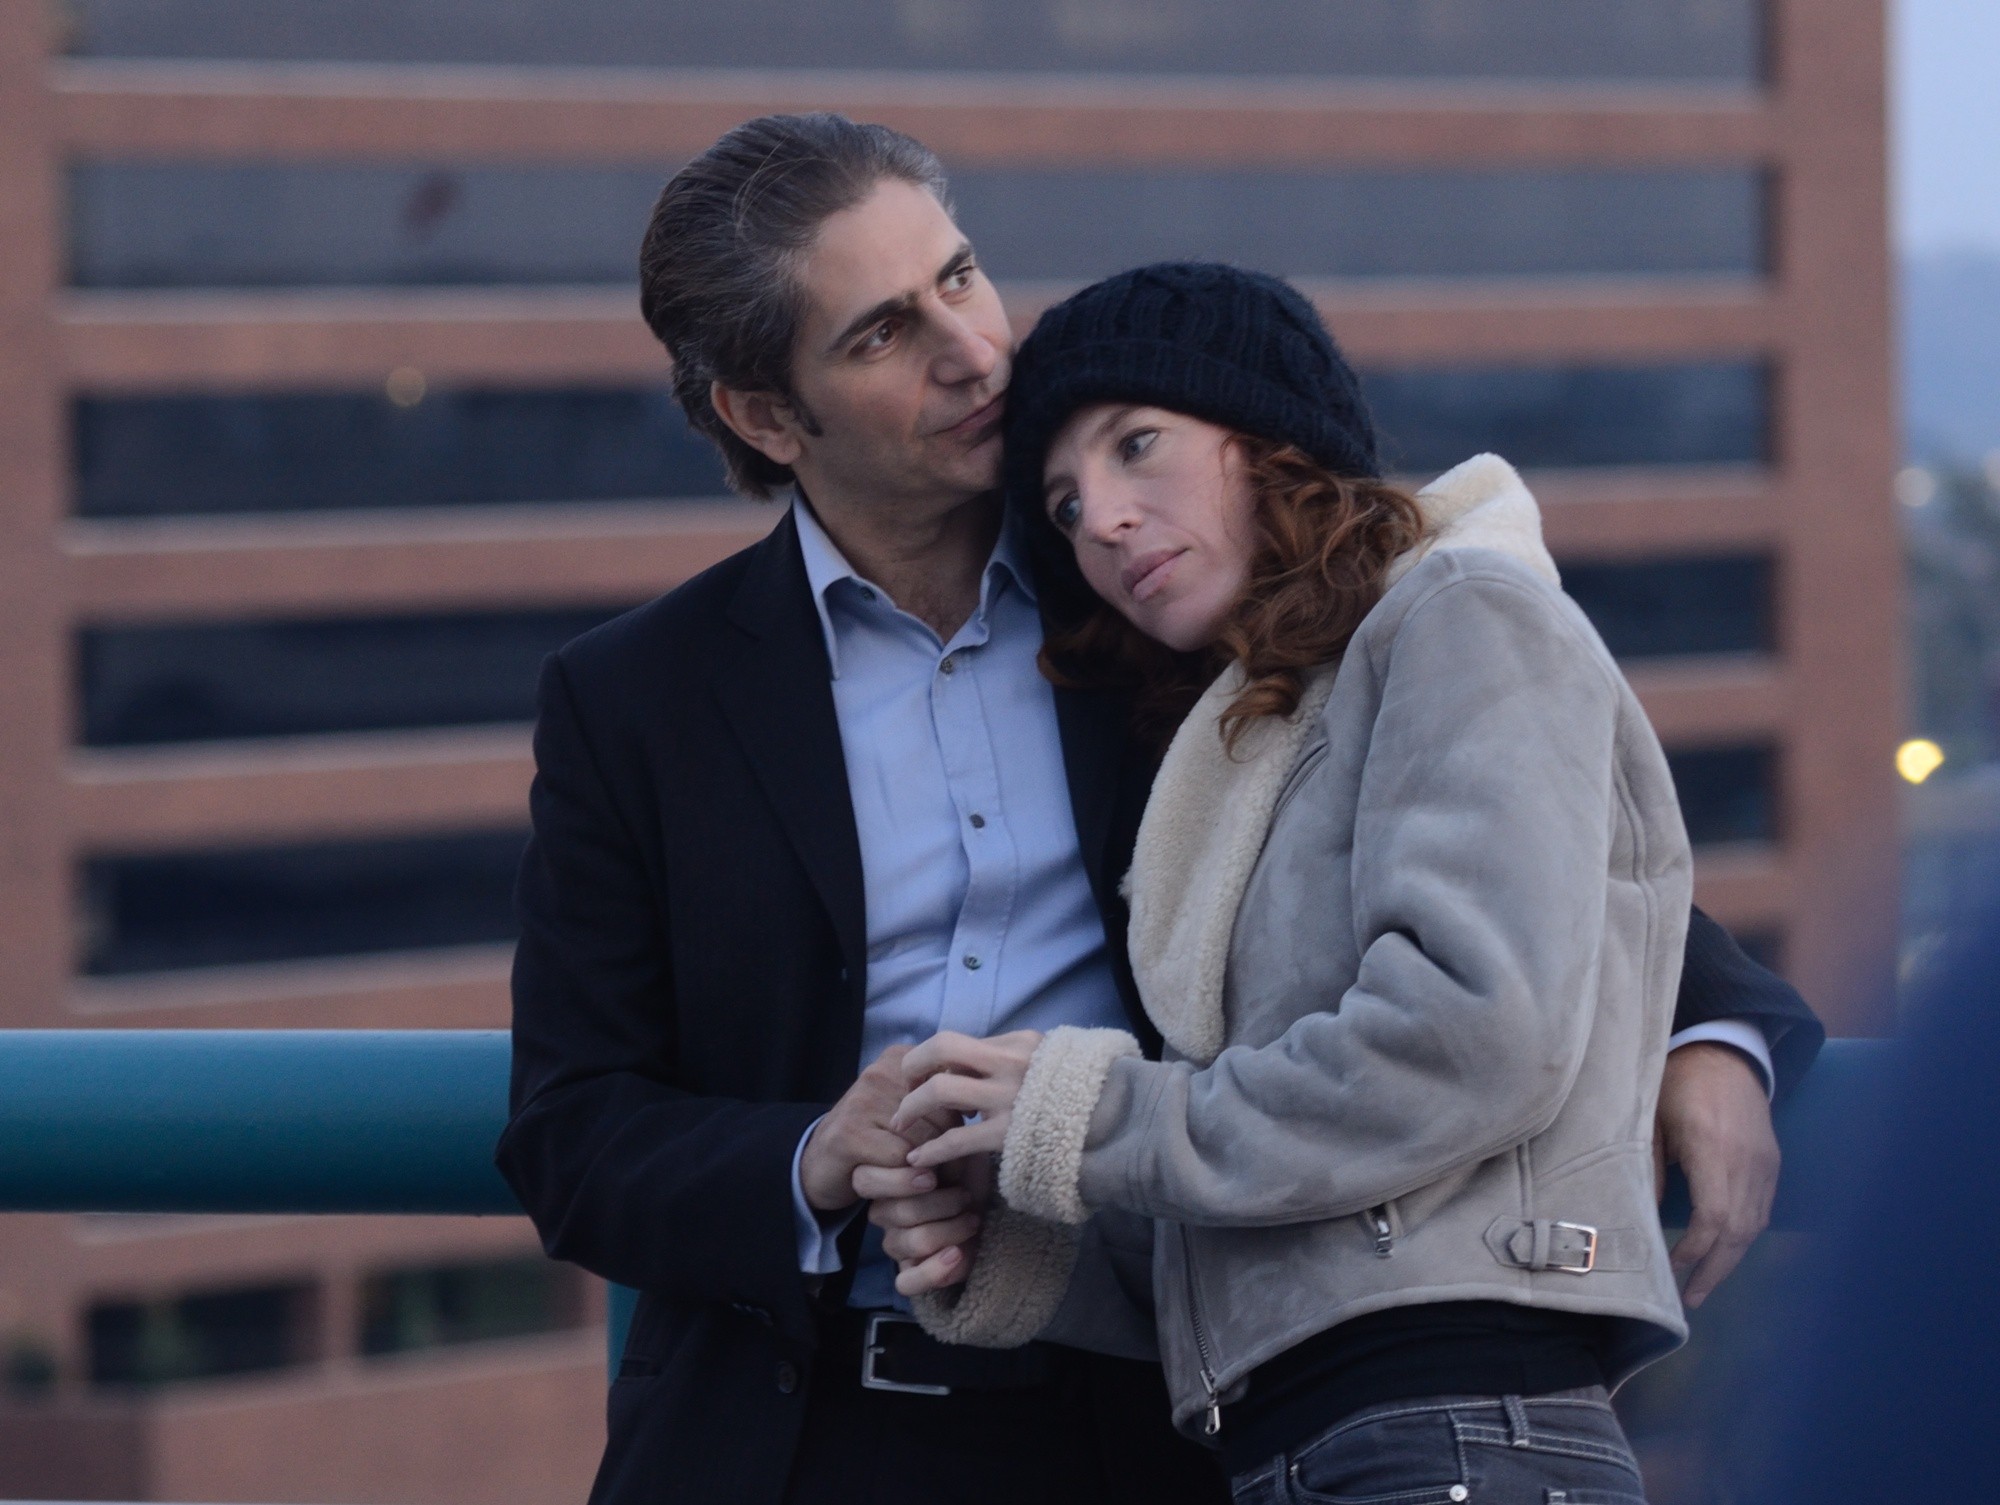 Michael Imperioli stars as Charlie Moon and Tanna Frederick stars as Moxie Landon in A Rainbow Film's The M Word (2014)